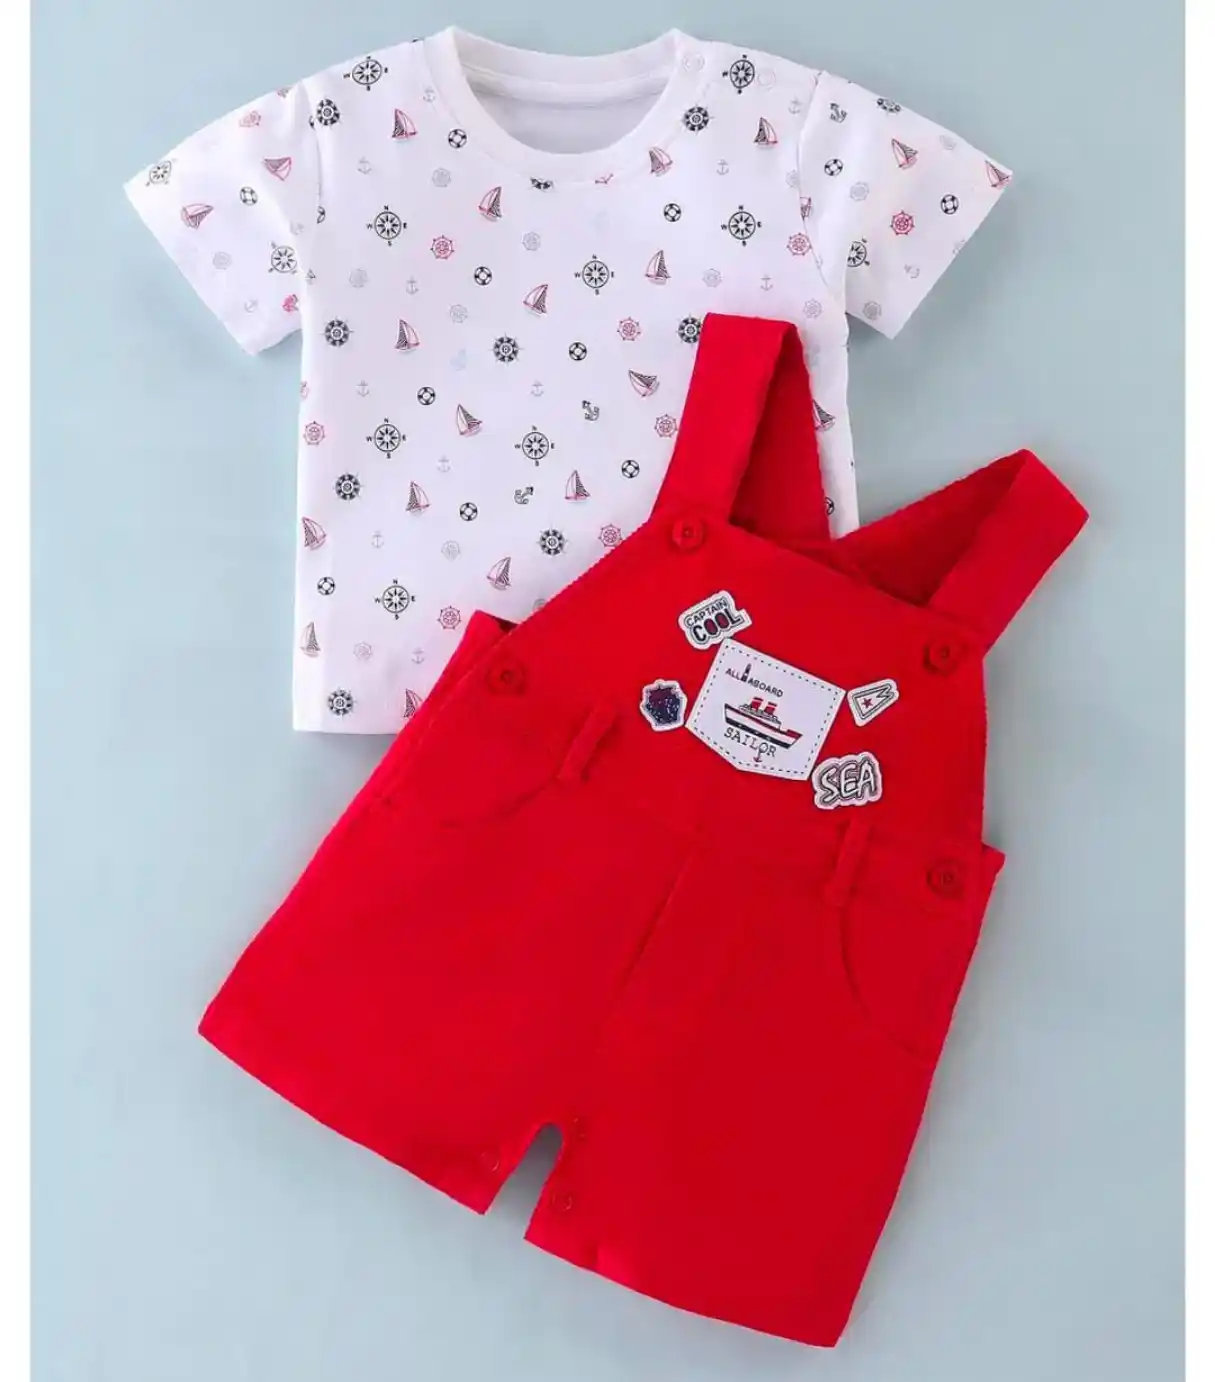 Cotton Knit Half Sleeve T Shirt Dungaree Print Red And White